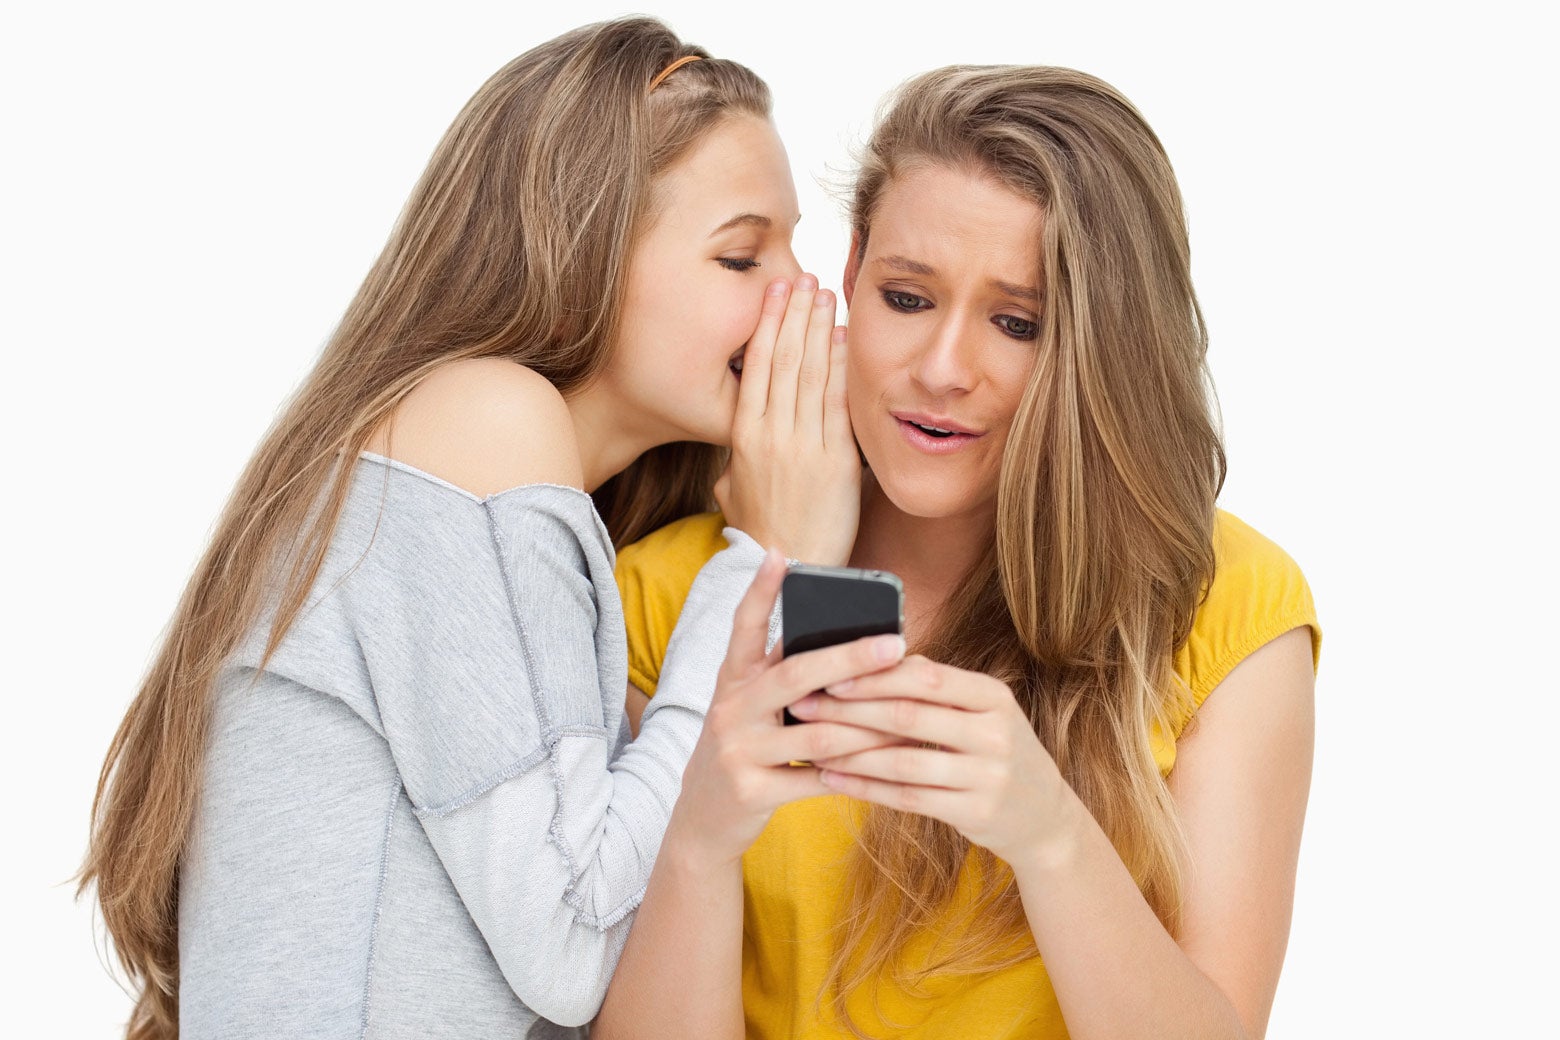 Two young women whispering while looking at a smartphone.